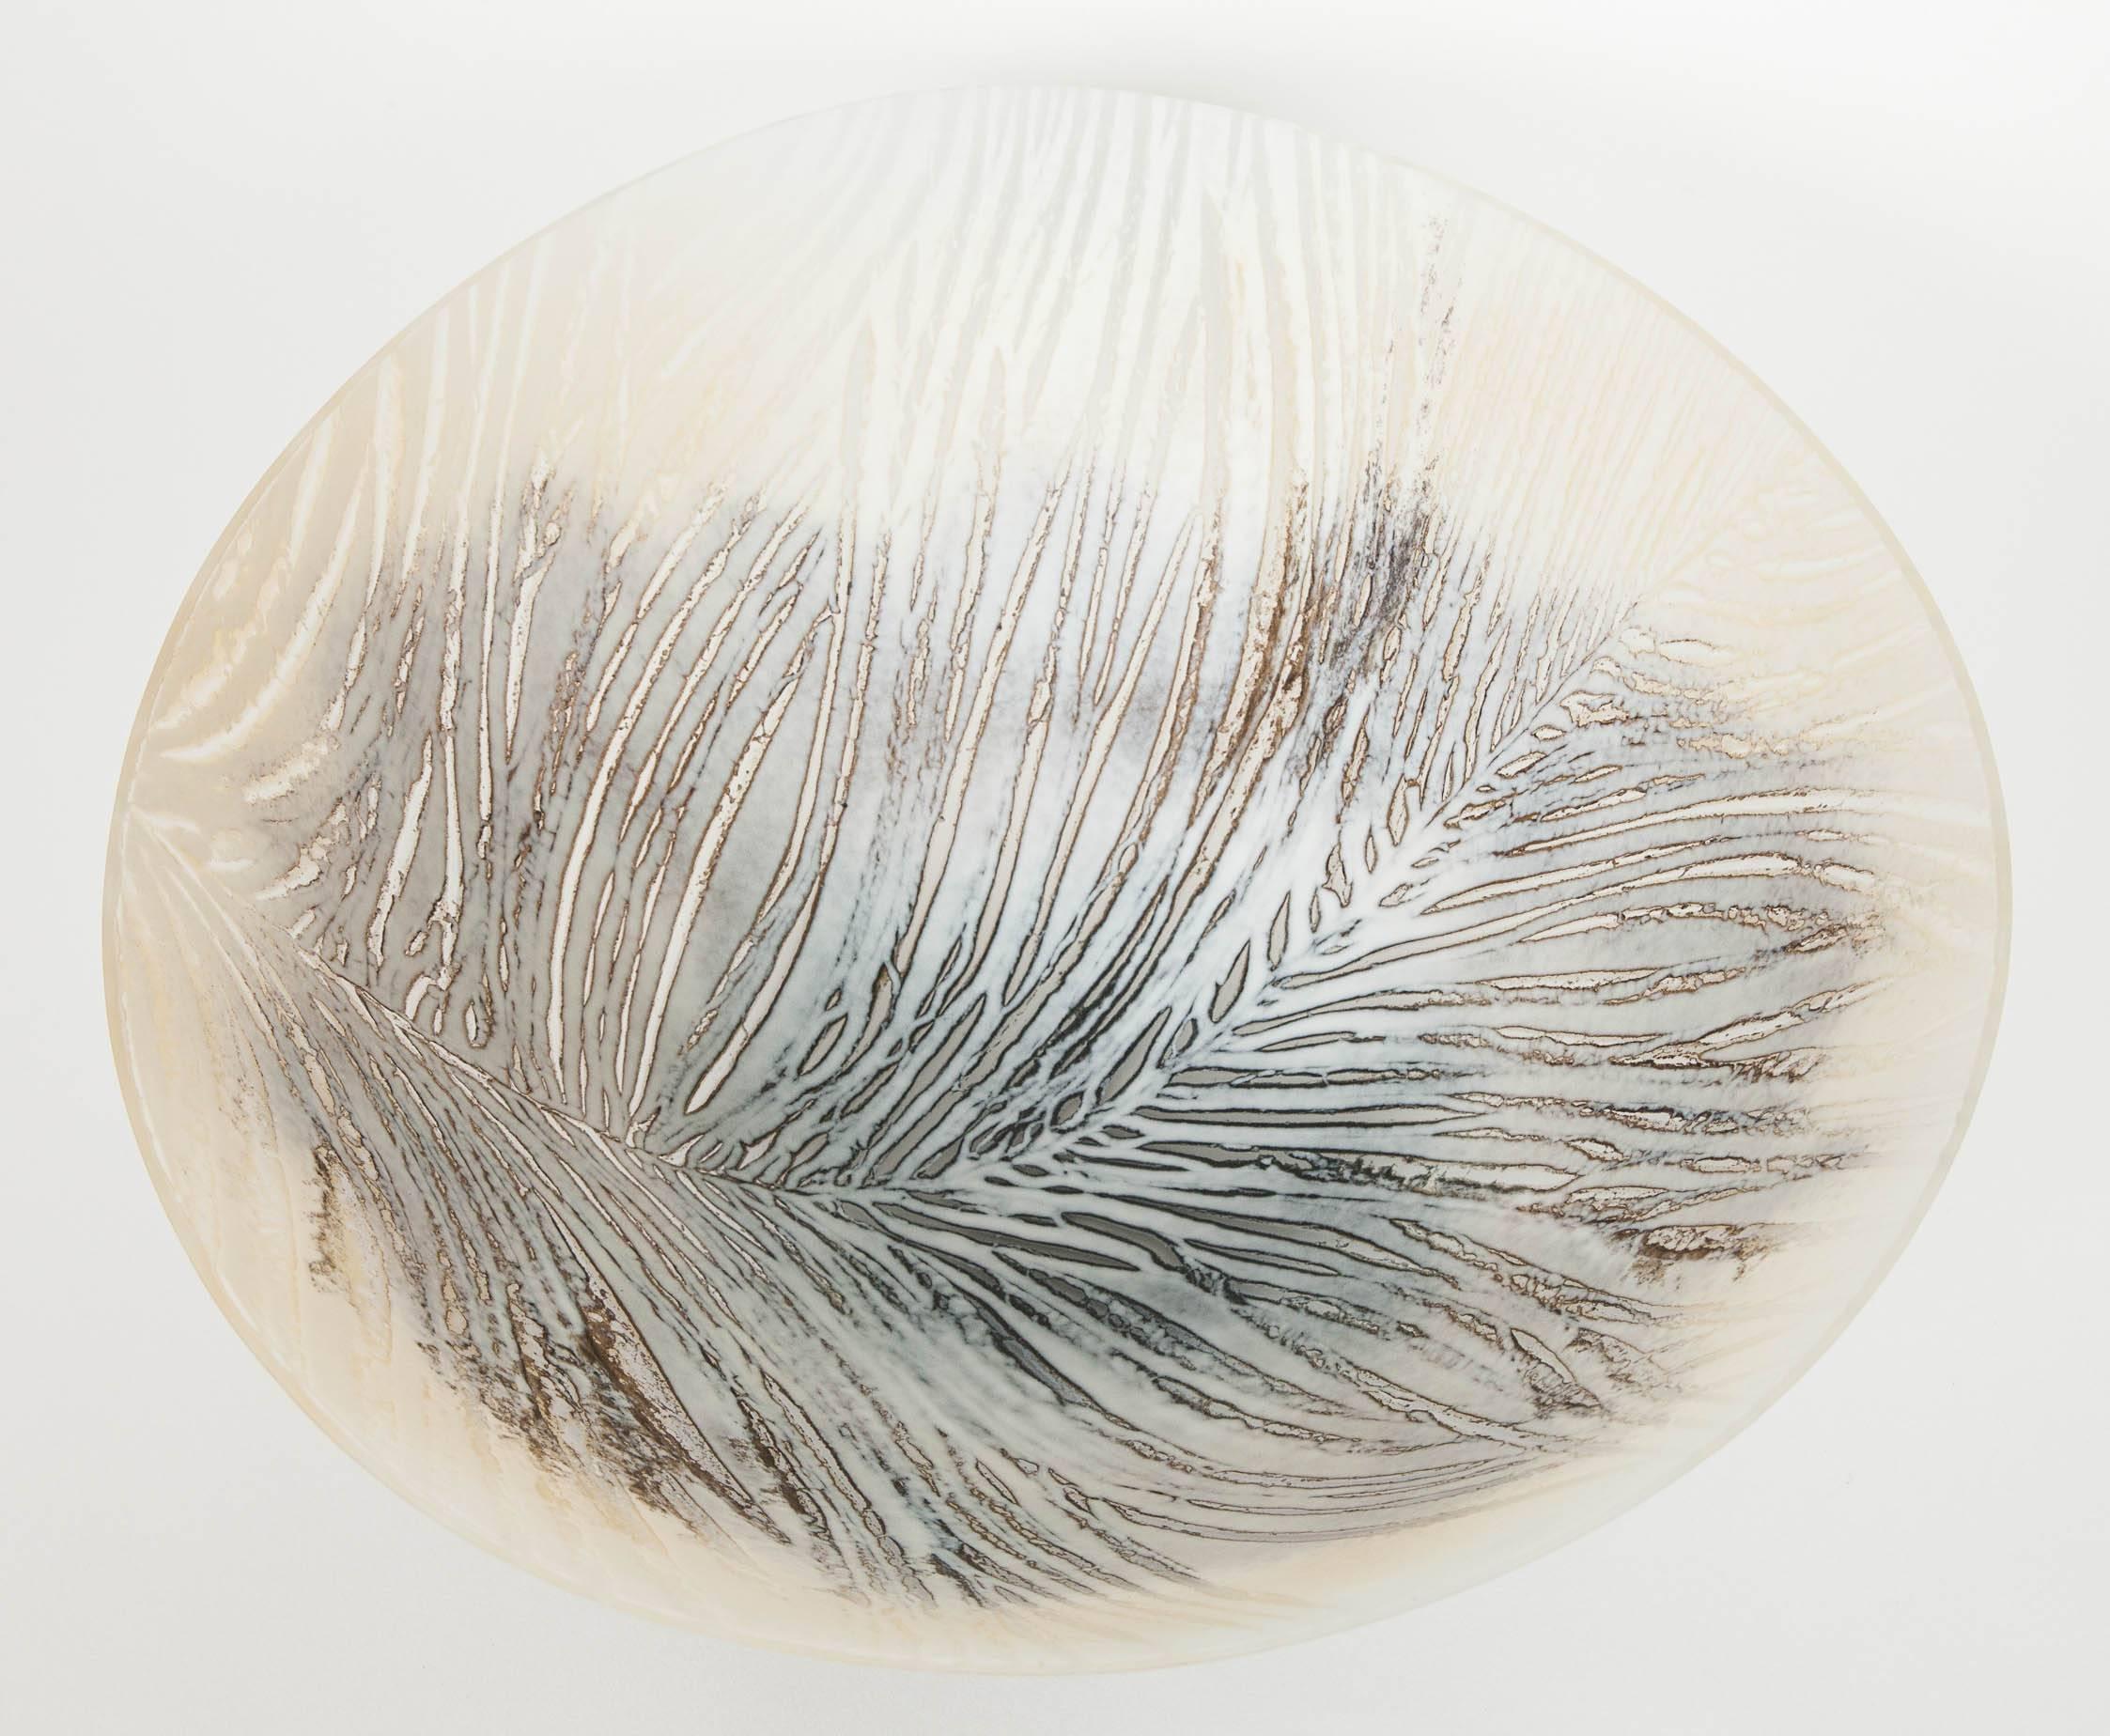 British Feather, a Unique Glass Bowl in natural tones & colours by Amanda Simmons